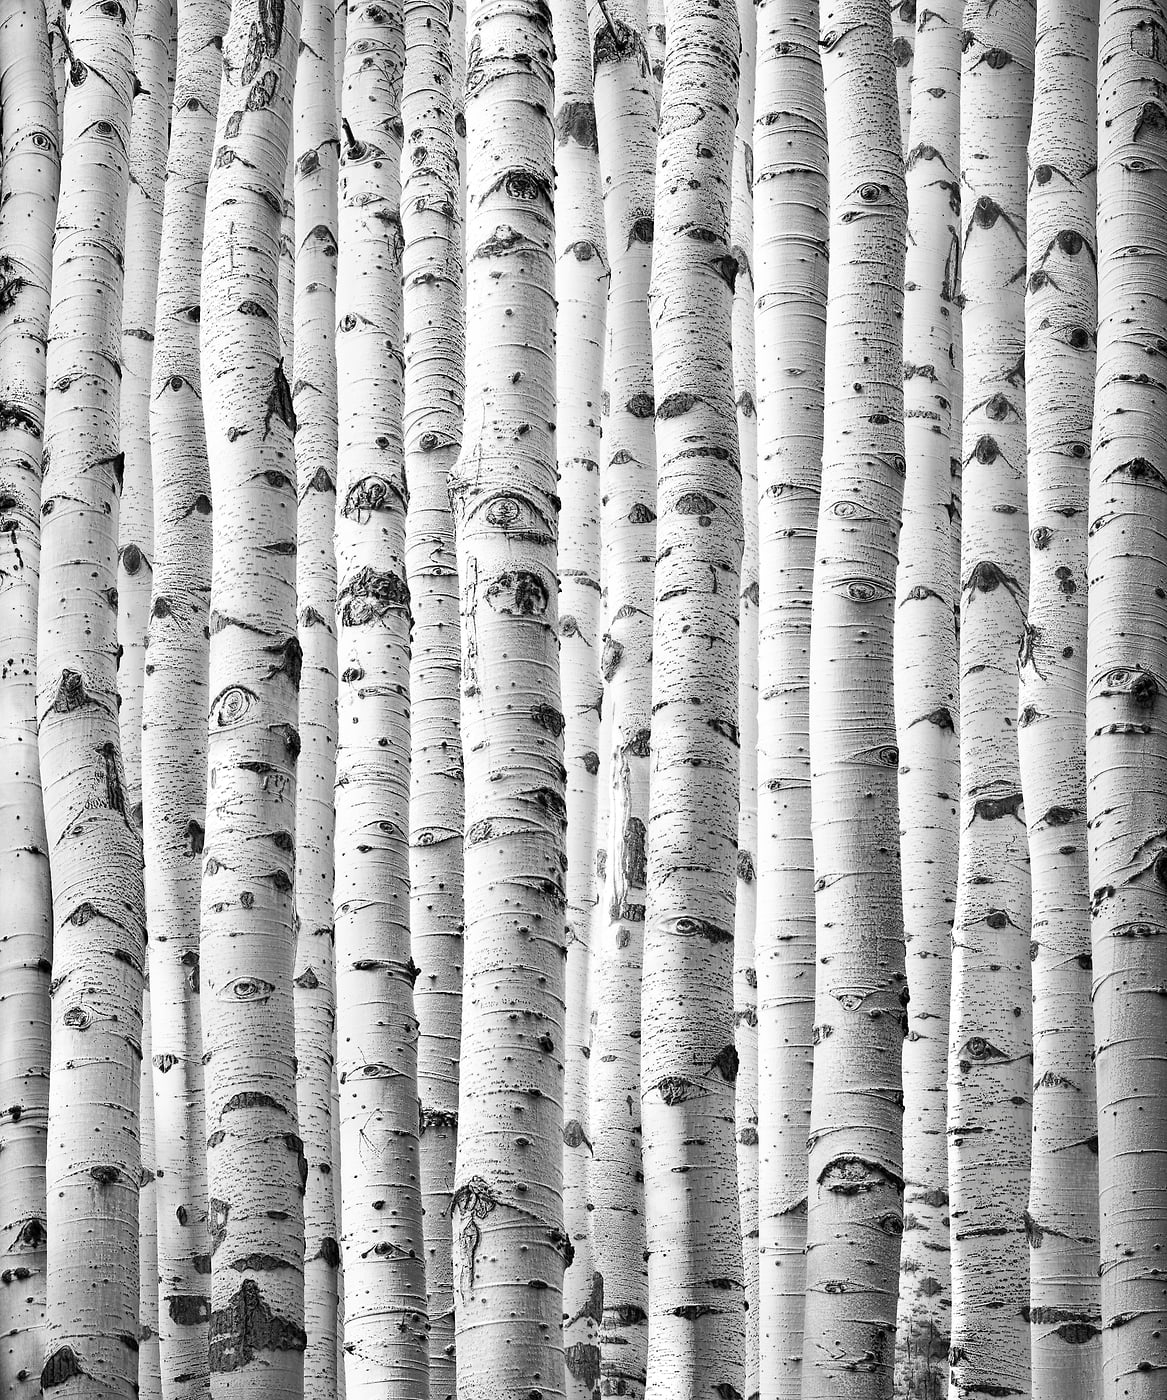 270 megapixels! A very high resolution, large-format VAST photo print of aspen trees; black and white abstract nature photograph created by Nick Pedersen.